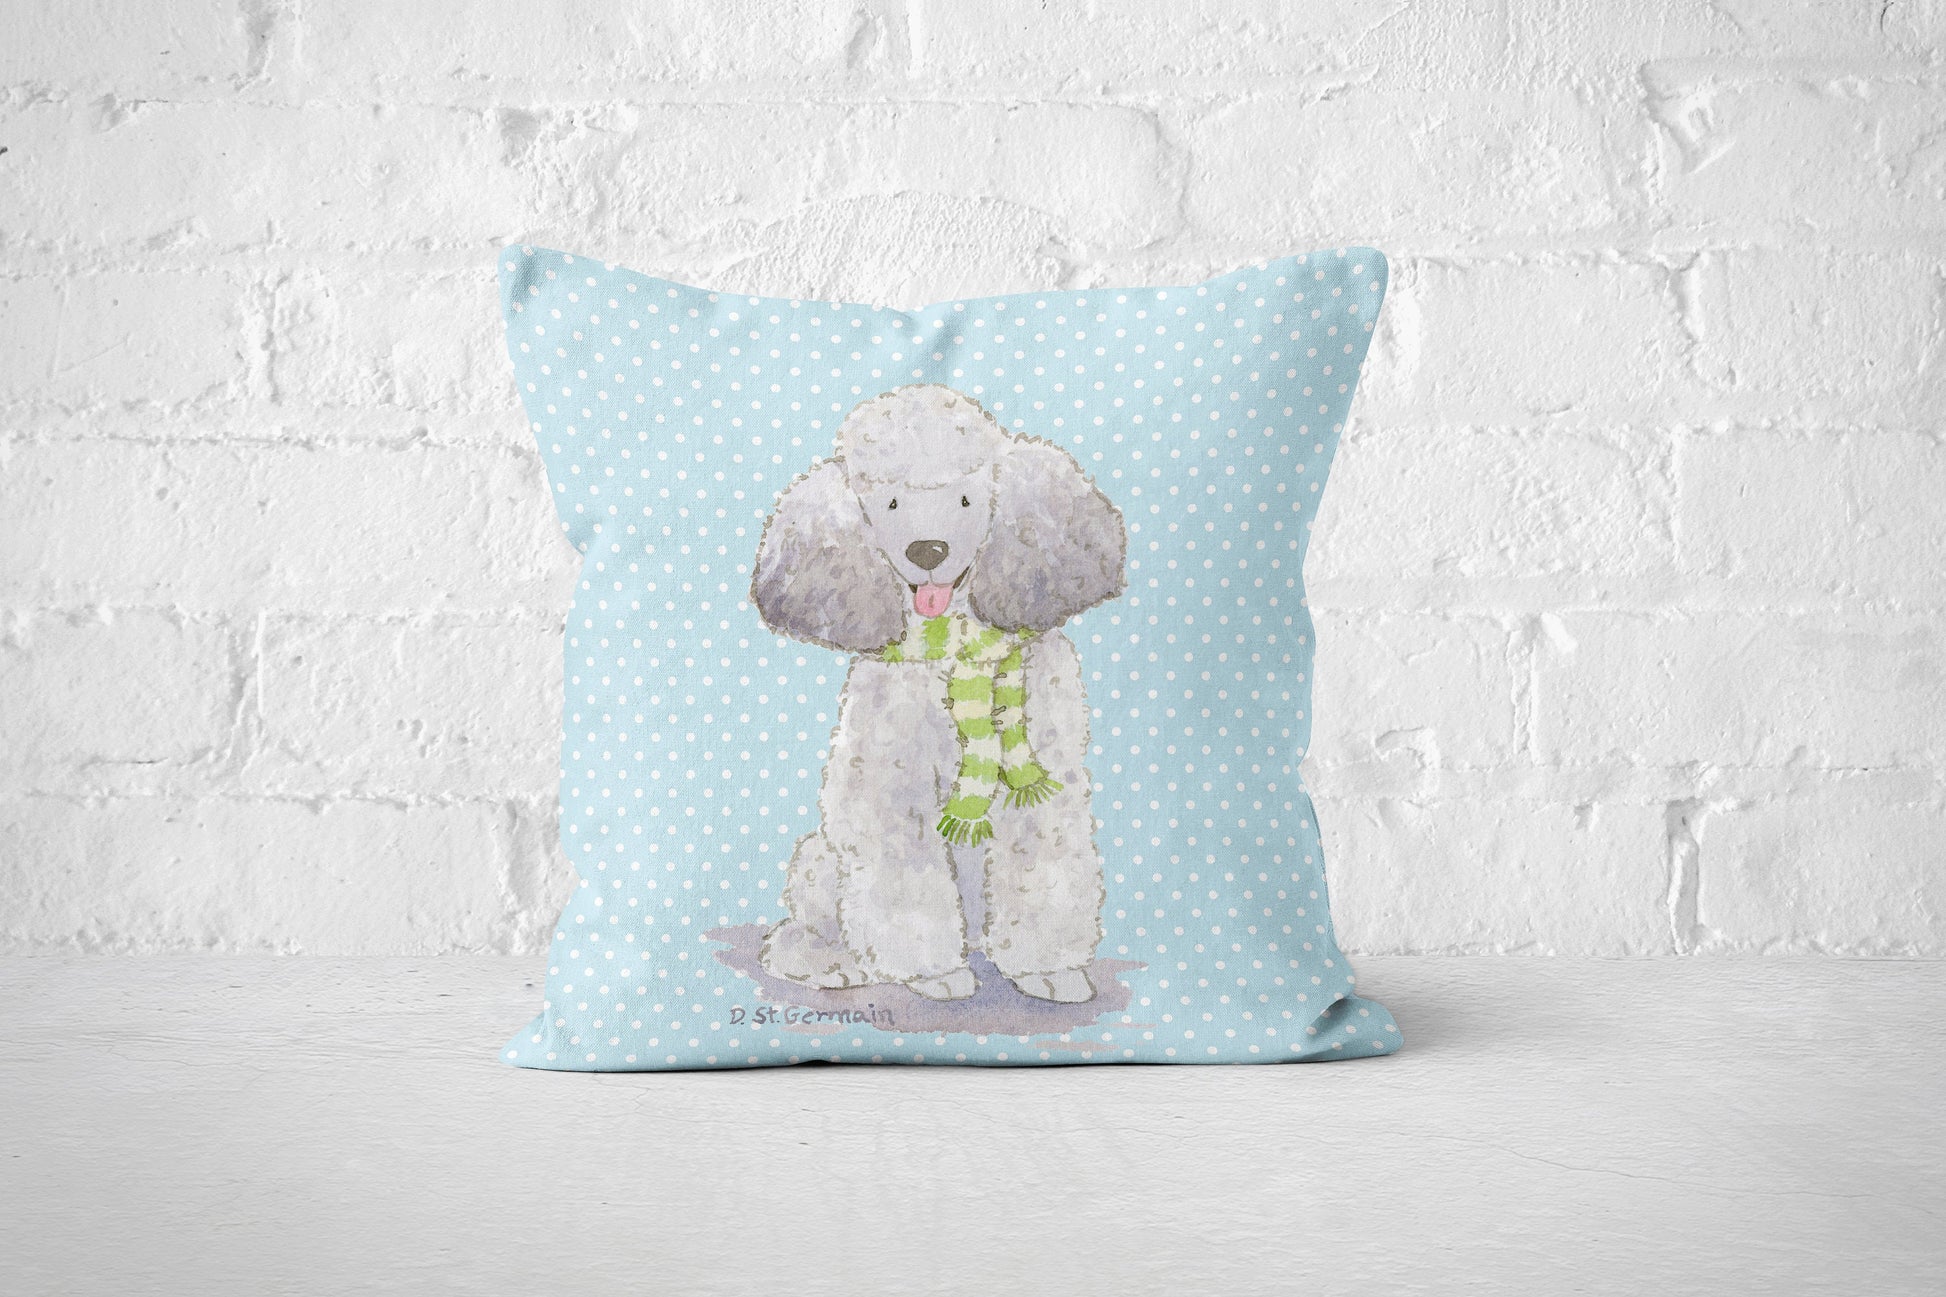 Poodle Holiday Pillow Cover, Christmas Pillow, Poodle Gift, Poodle Christmas Gift, Silver Poodle Gift, Gray Poodle, Holiday Dog Decor